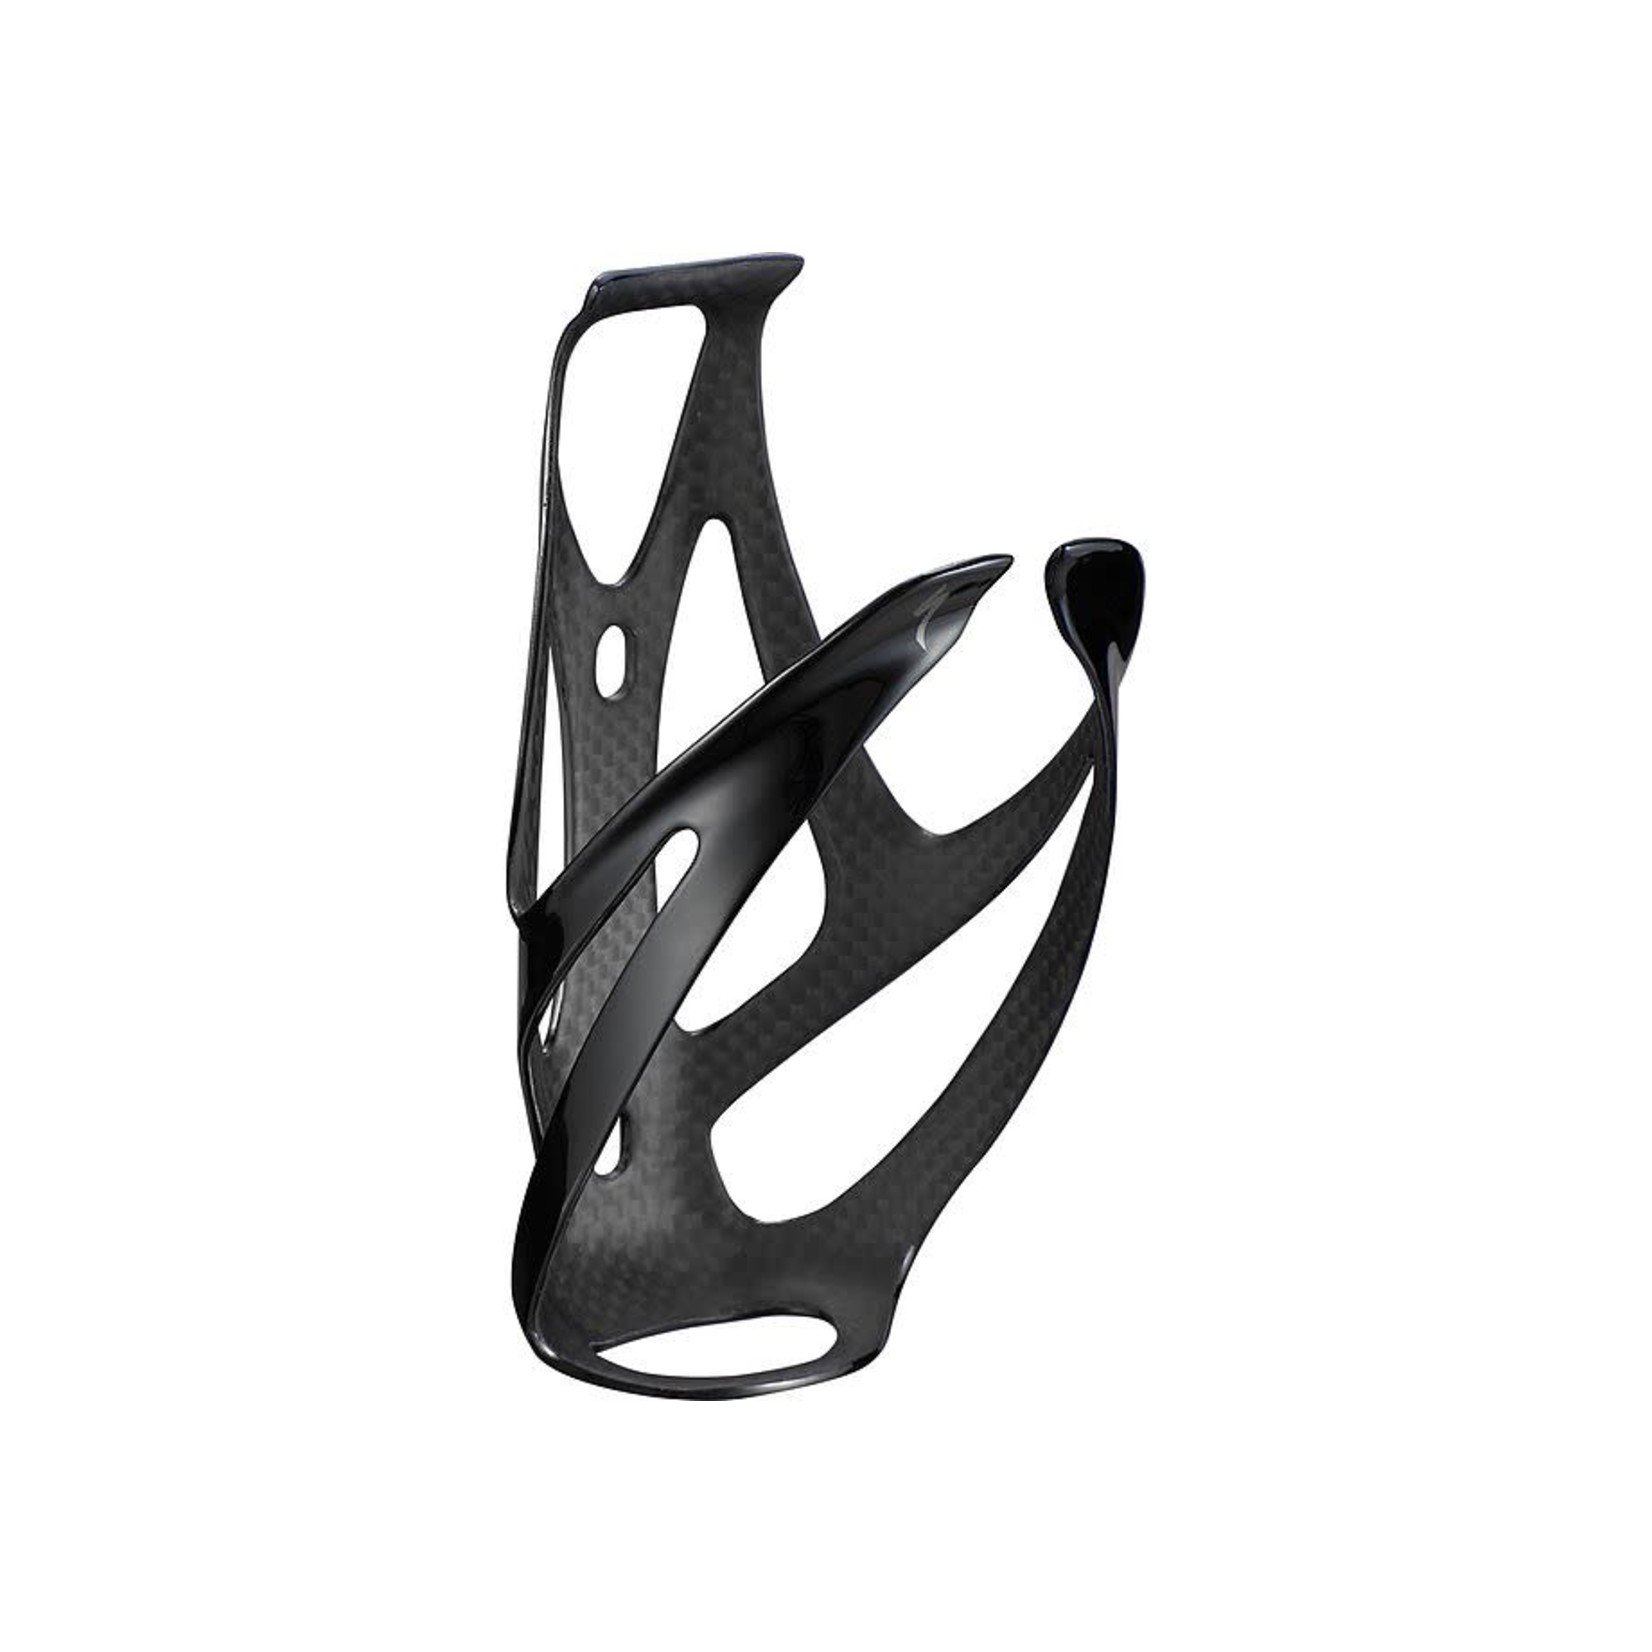 Specialized S-WORKS CARBON RIB CAGE III - CARBON/GLOSS BLACK